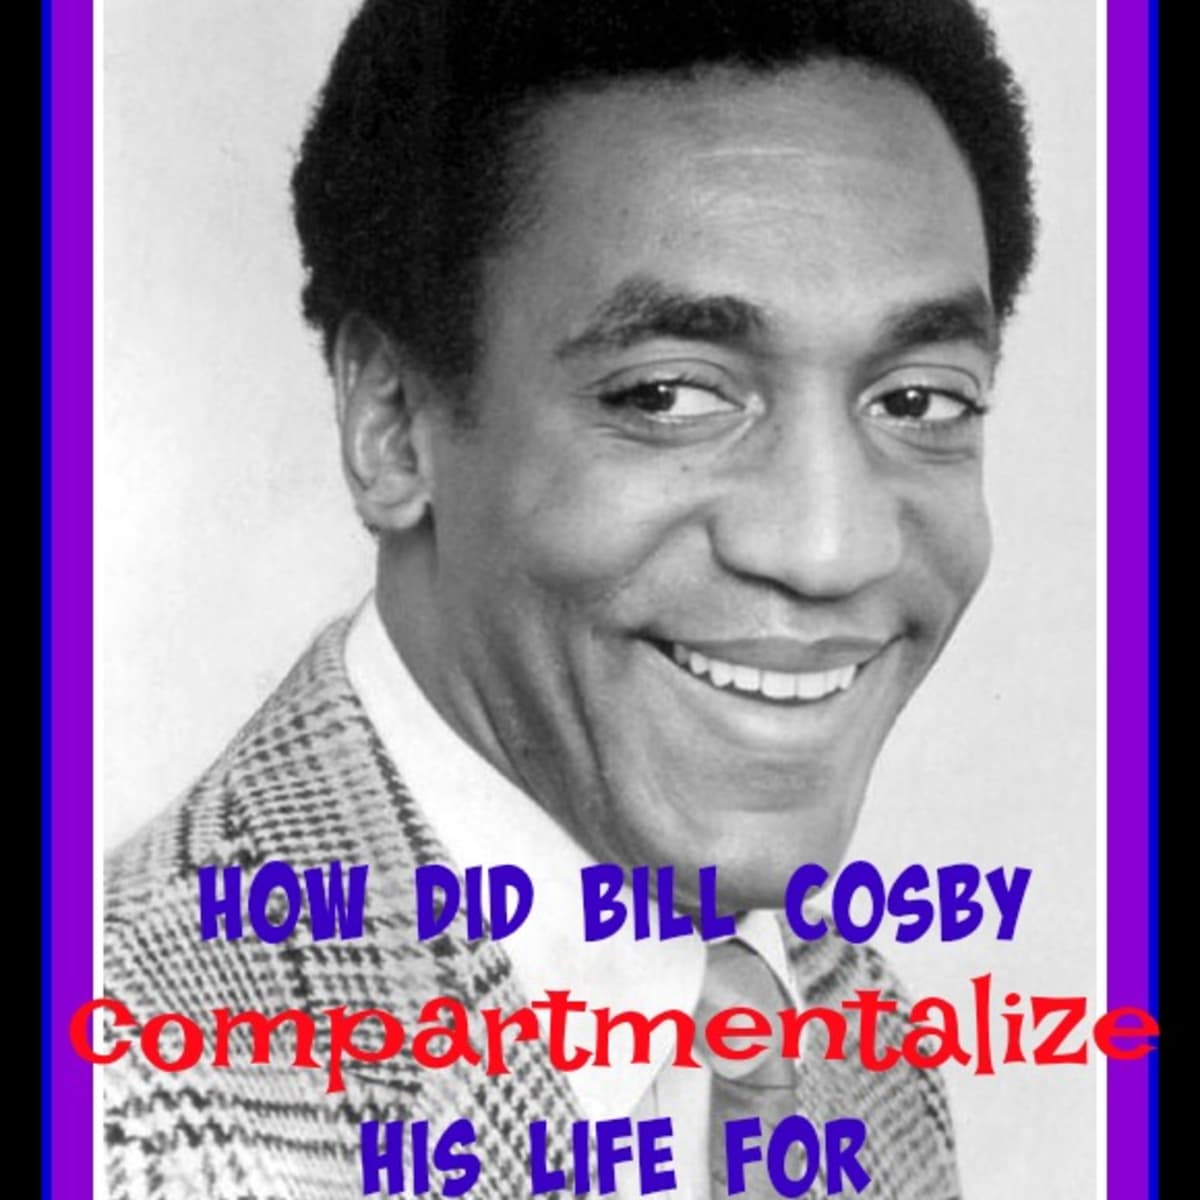 Let's all stop pretending we're shocked about Bill Cosby's bad